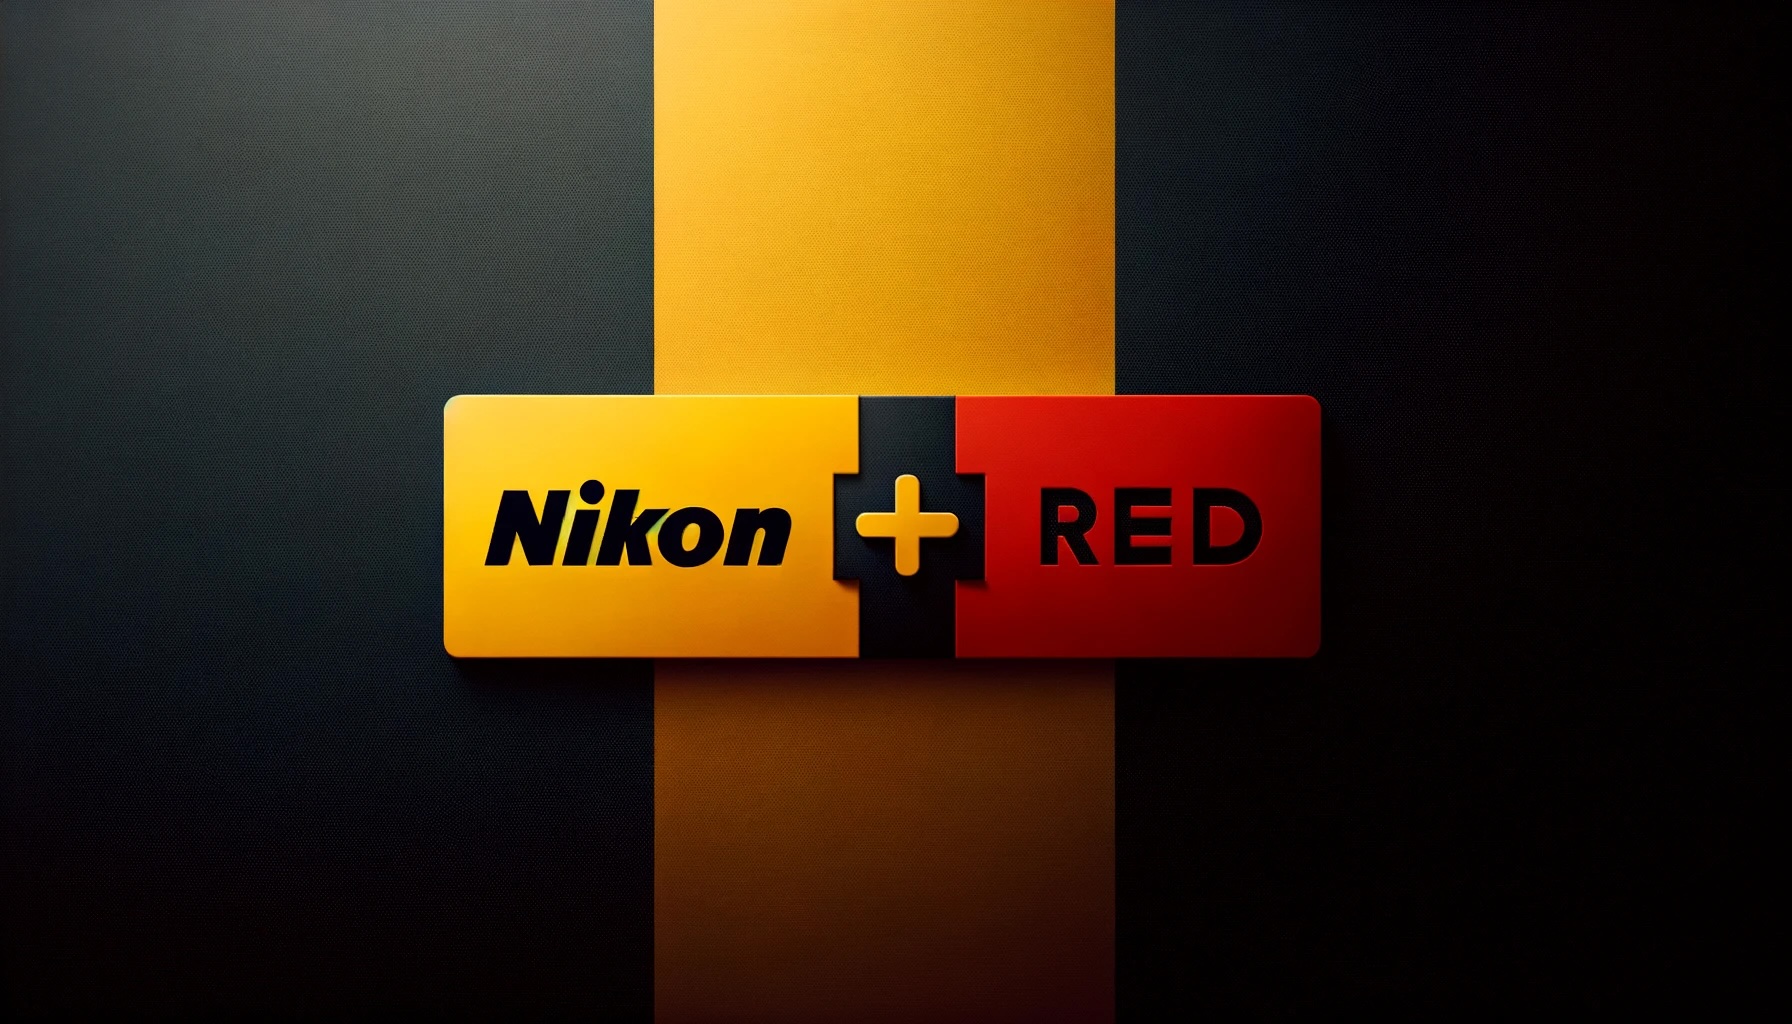 Nikon Acquires RED, Perhaps a New Era for Visual Storytellers